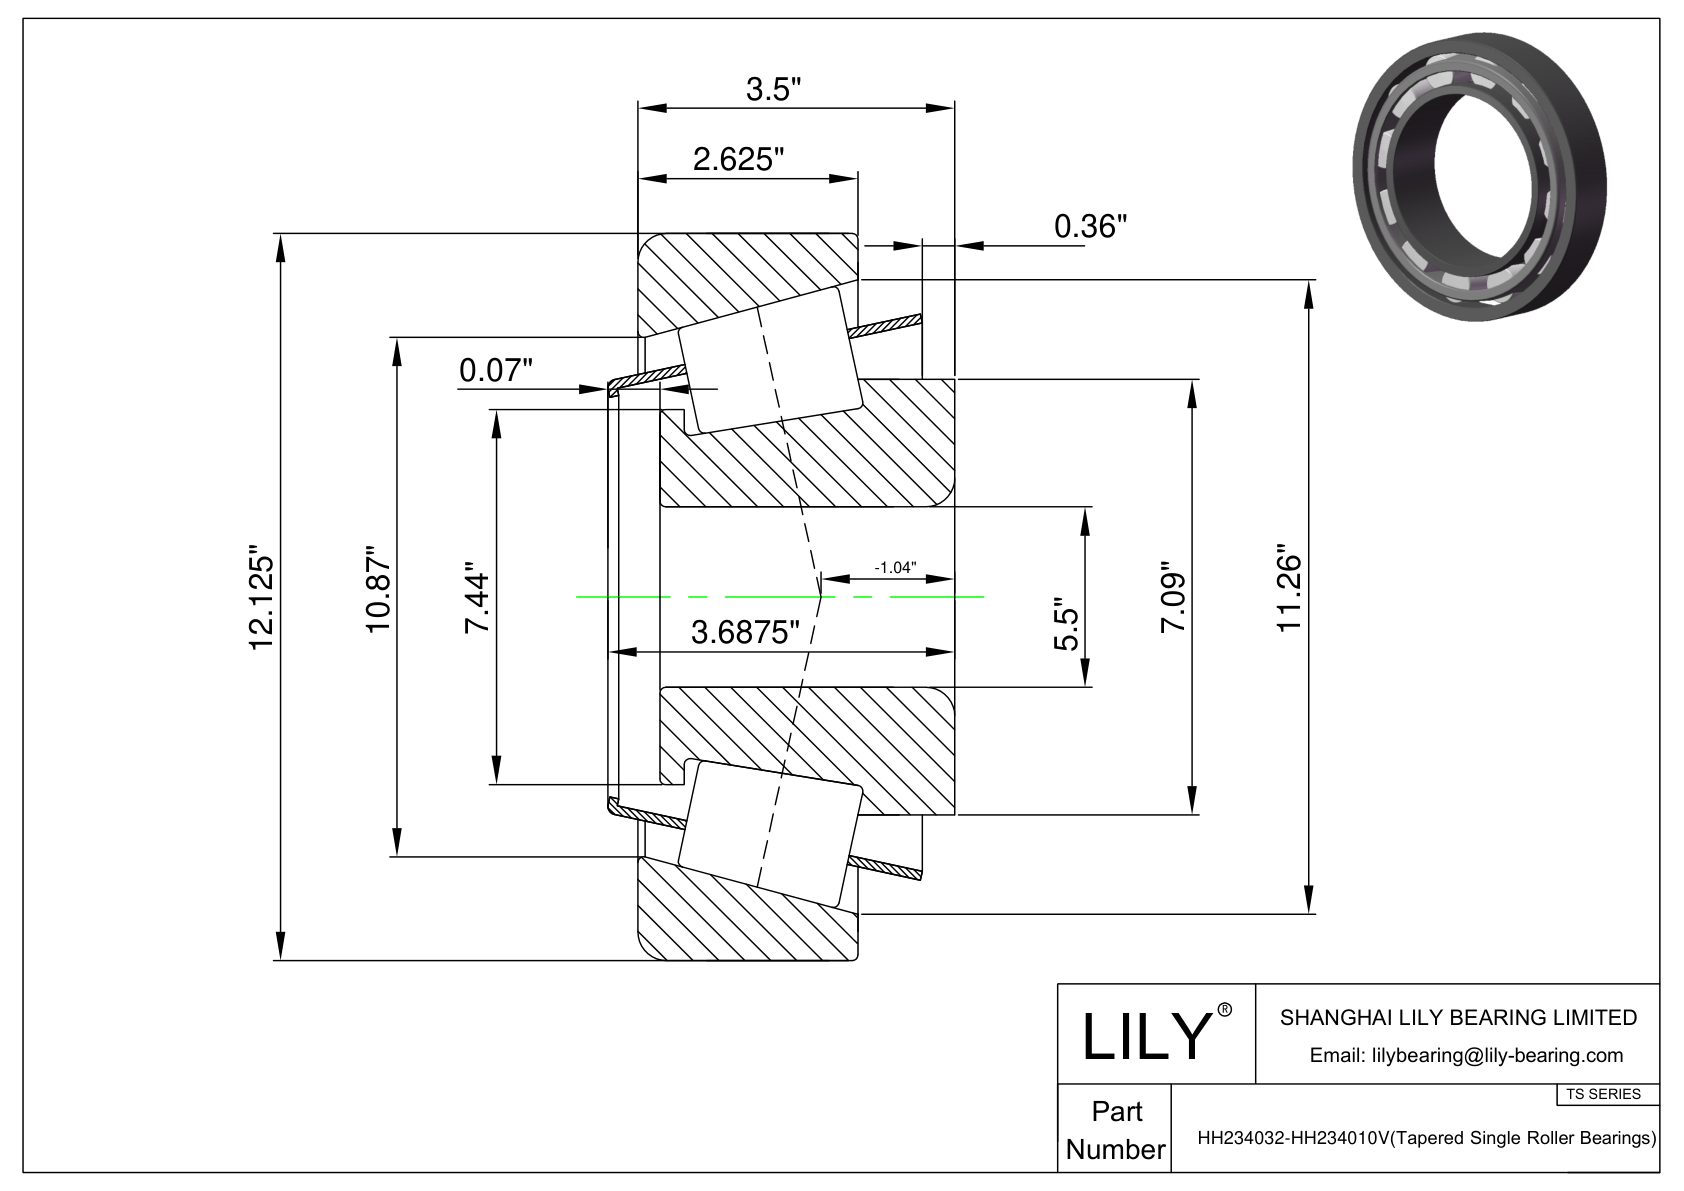 HH234032-HH234010V TS (Tapered Single Roller Bearings) (Imperial) cad drawing